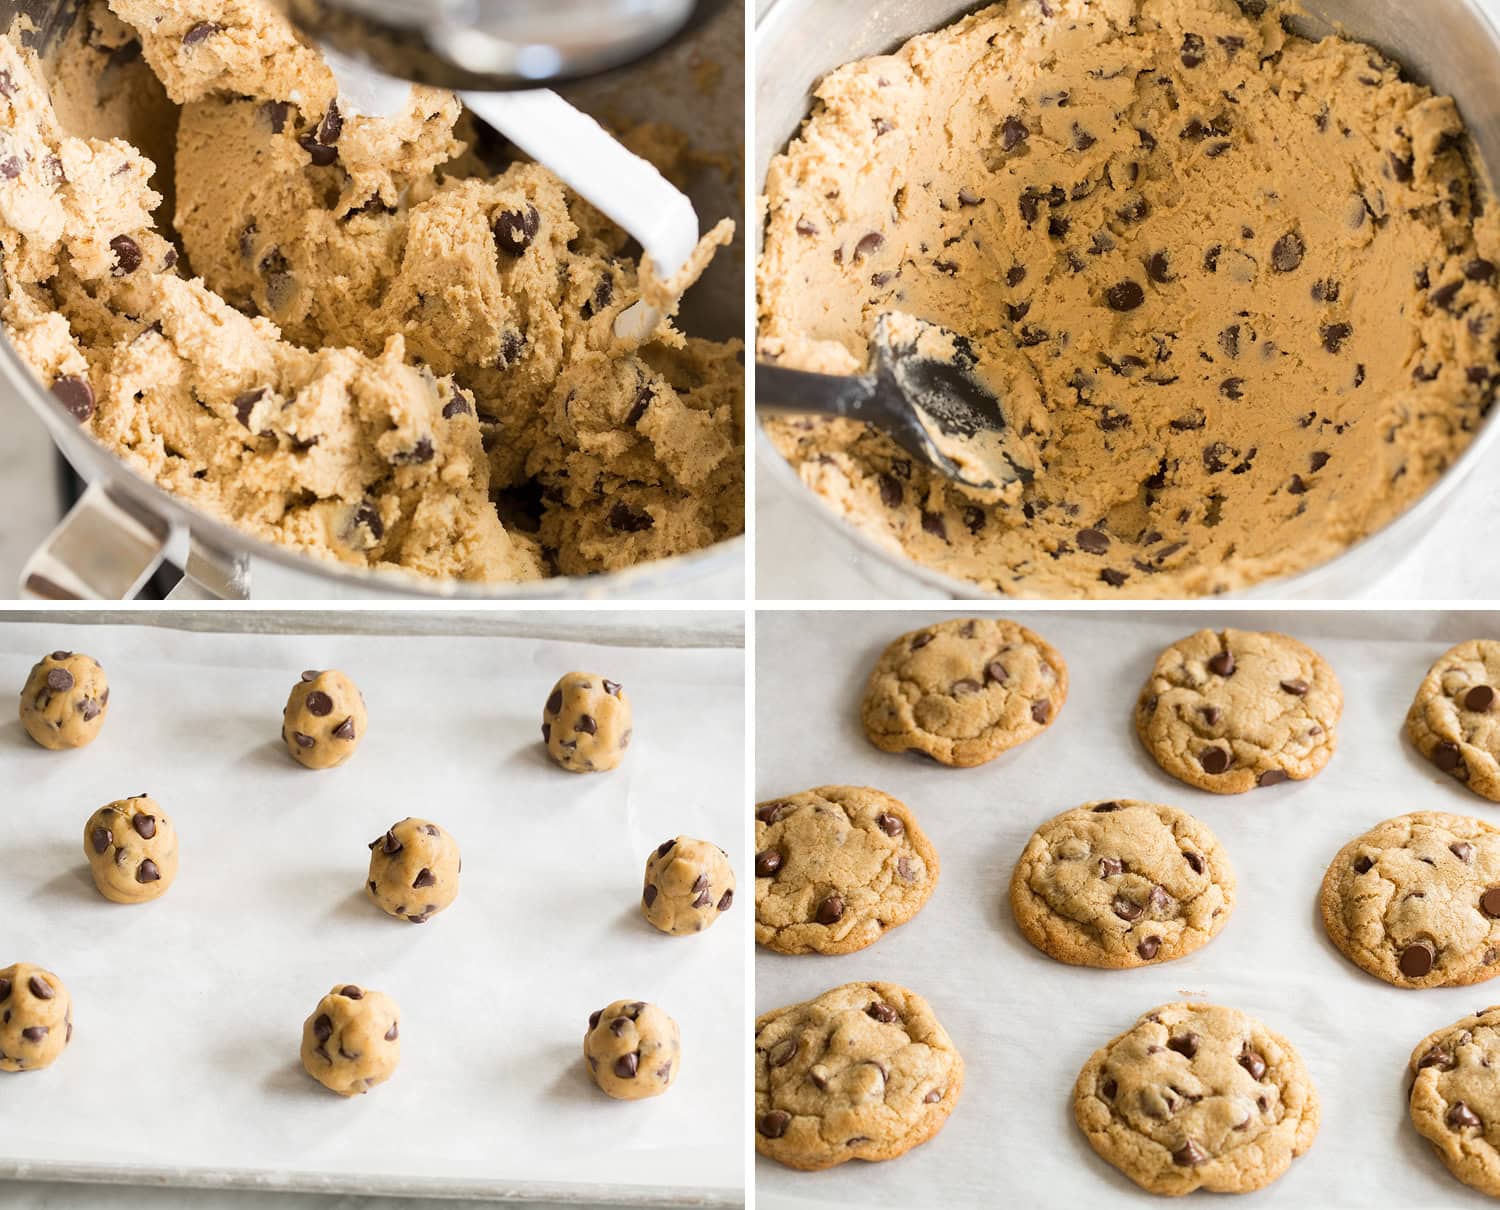 Finished cookie dough shown shaped into rounds then baked on a baking sheet.